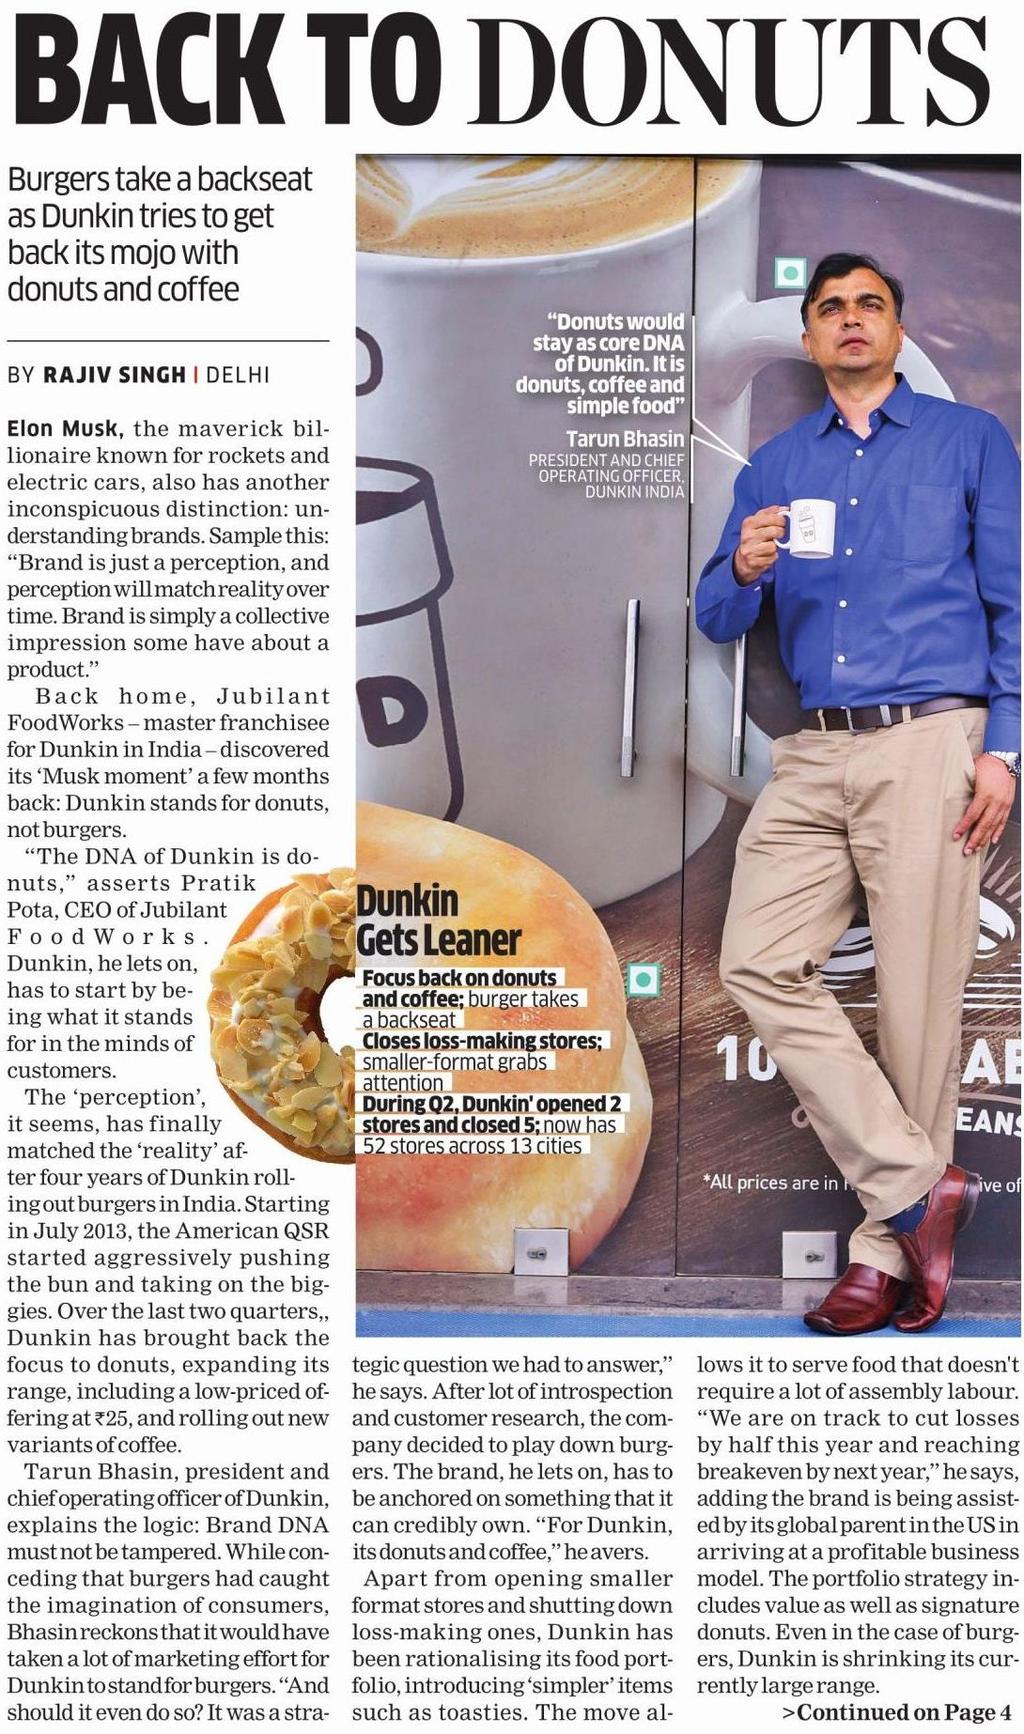 Title Publication Edition BACK TO DONUTS Date 13/12/2017 The Economic Times (Brand Equity)